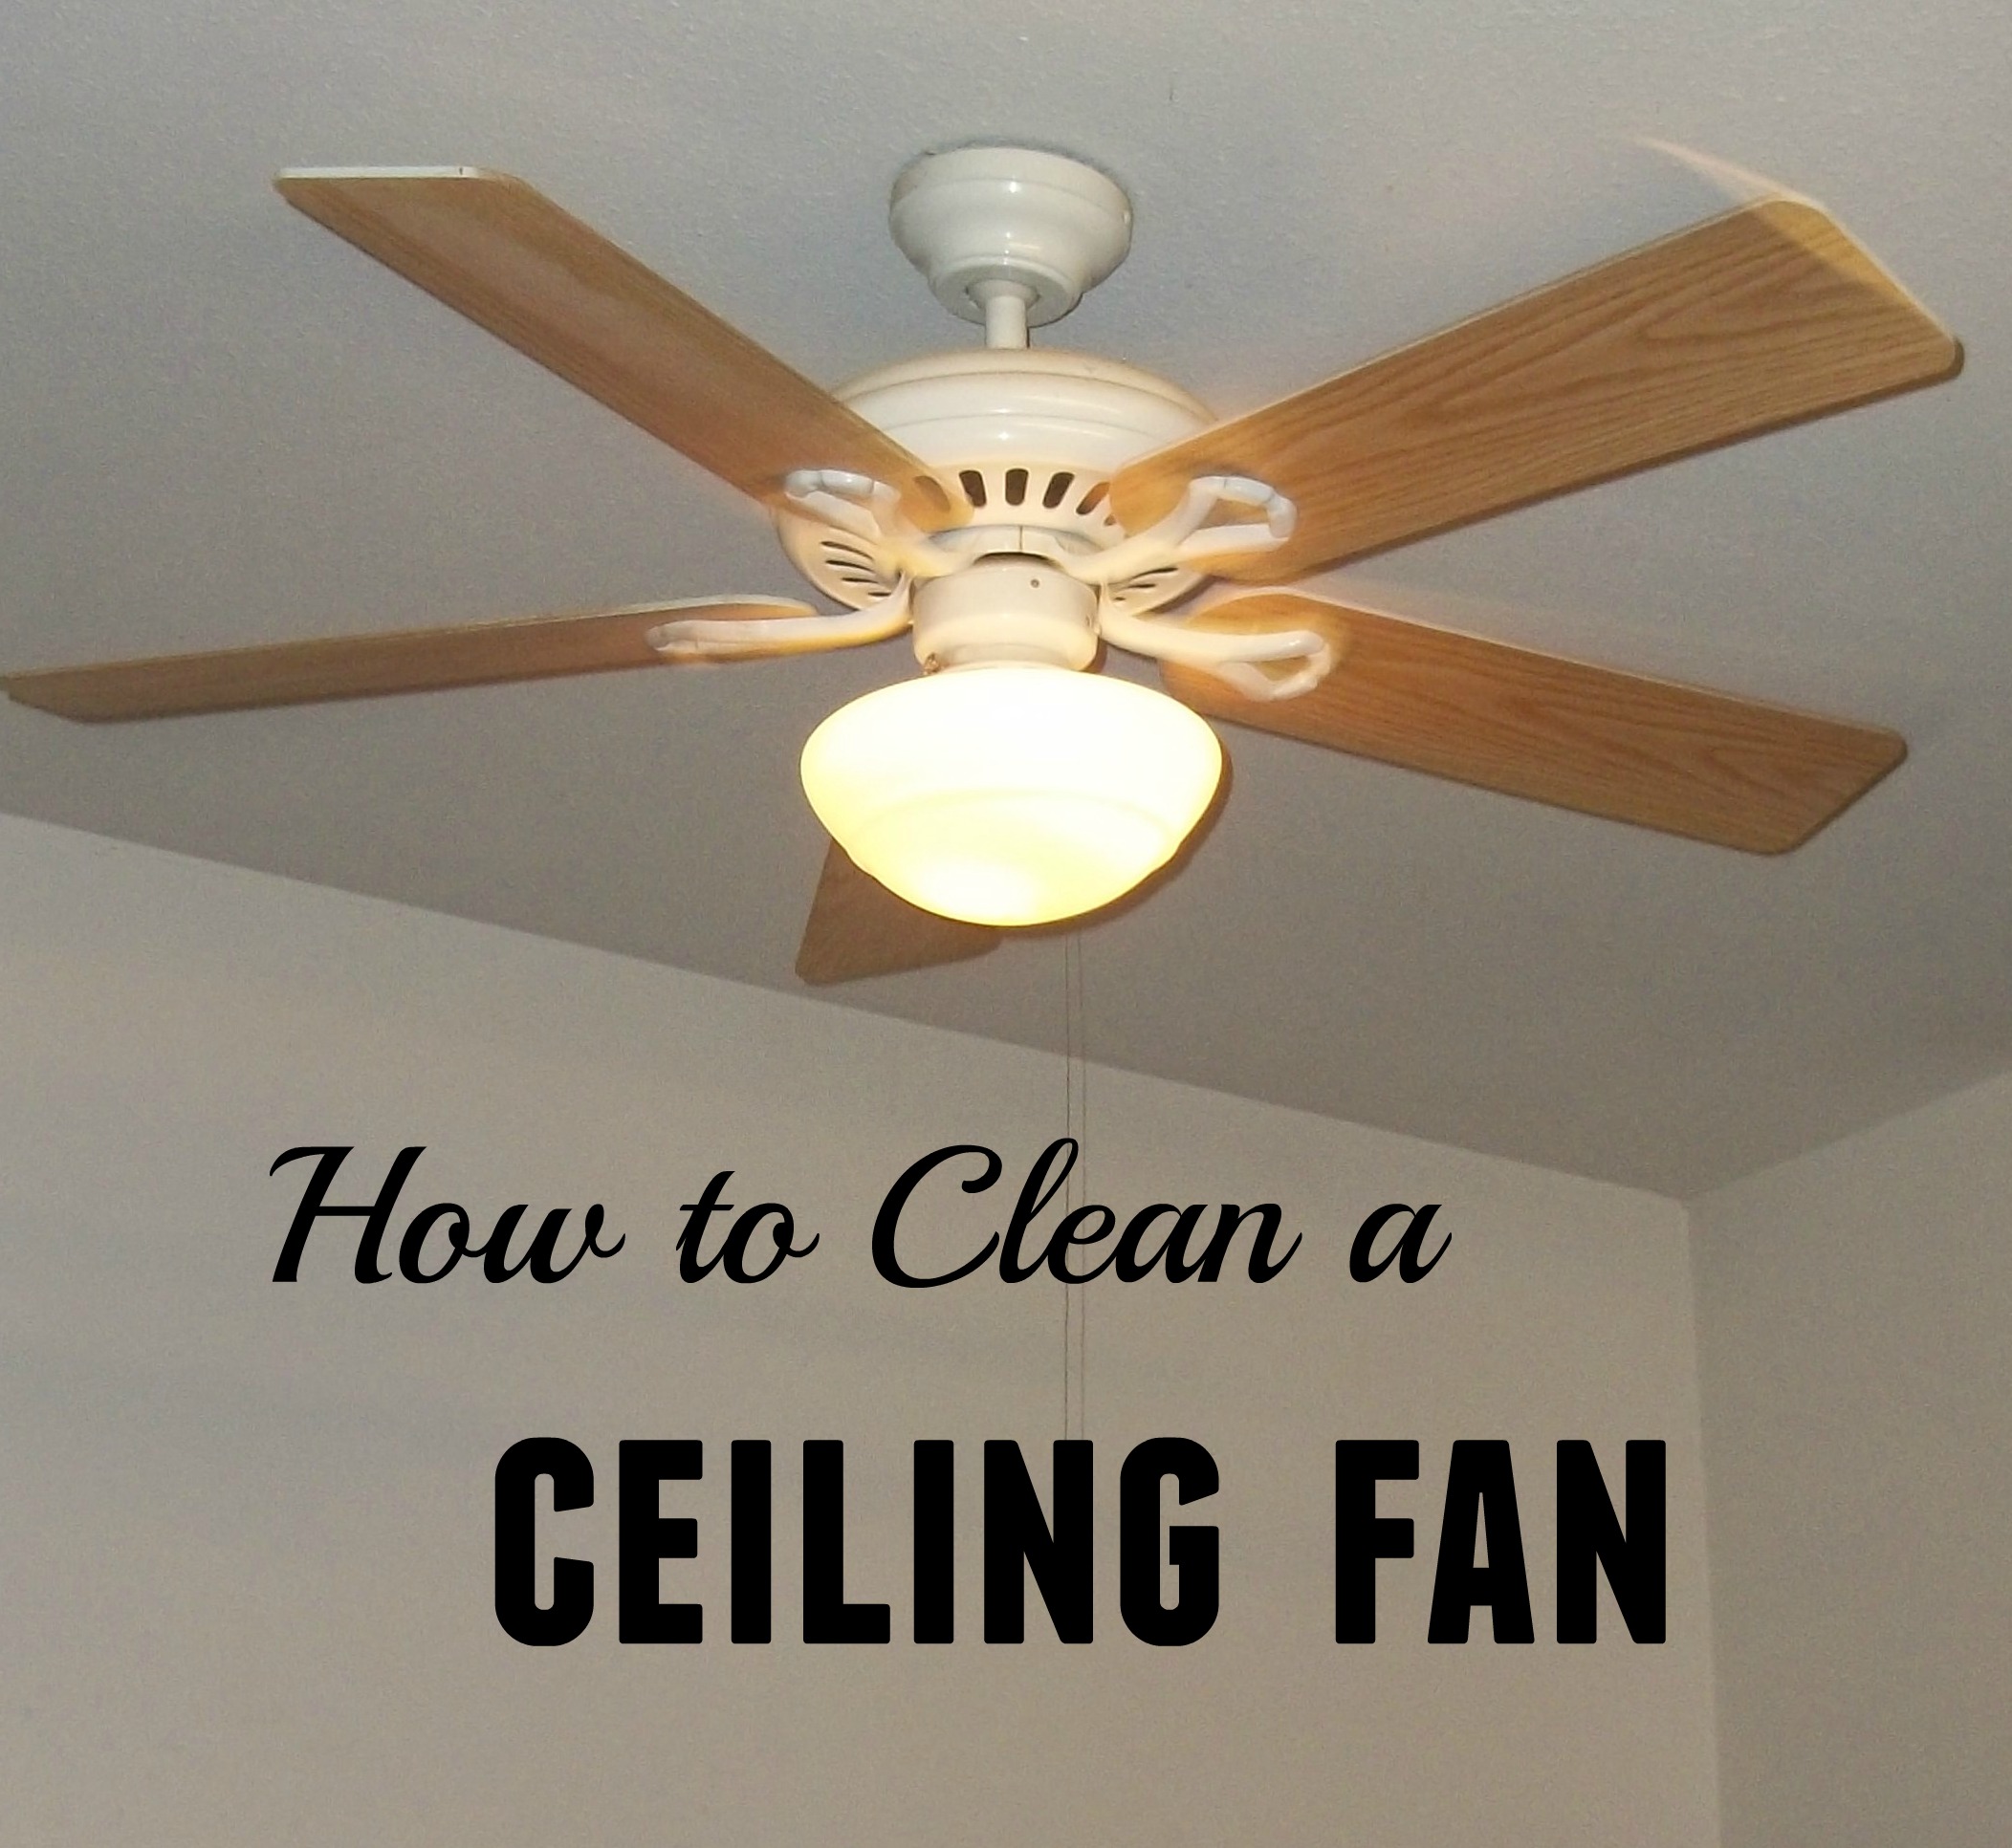 HOW TO CLEAN A CEILING FAN